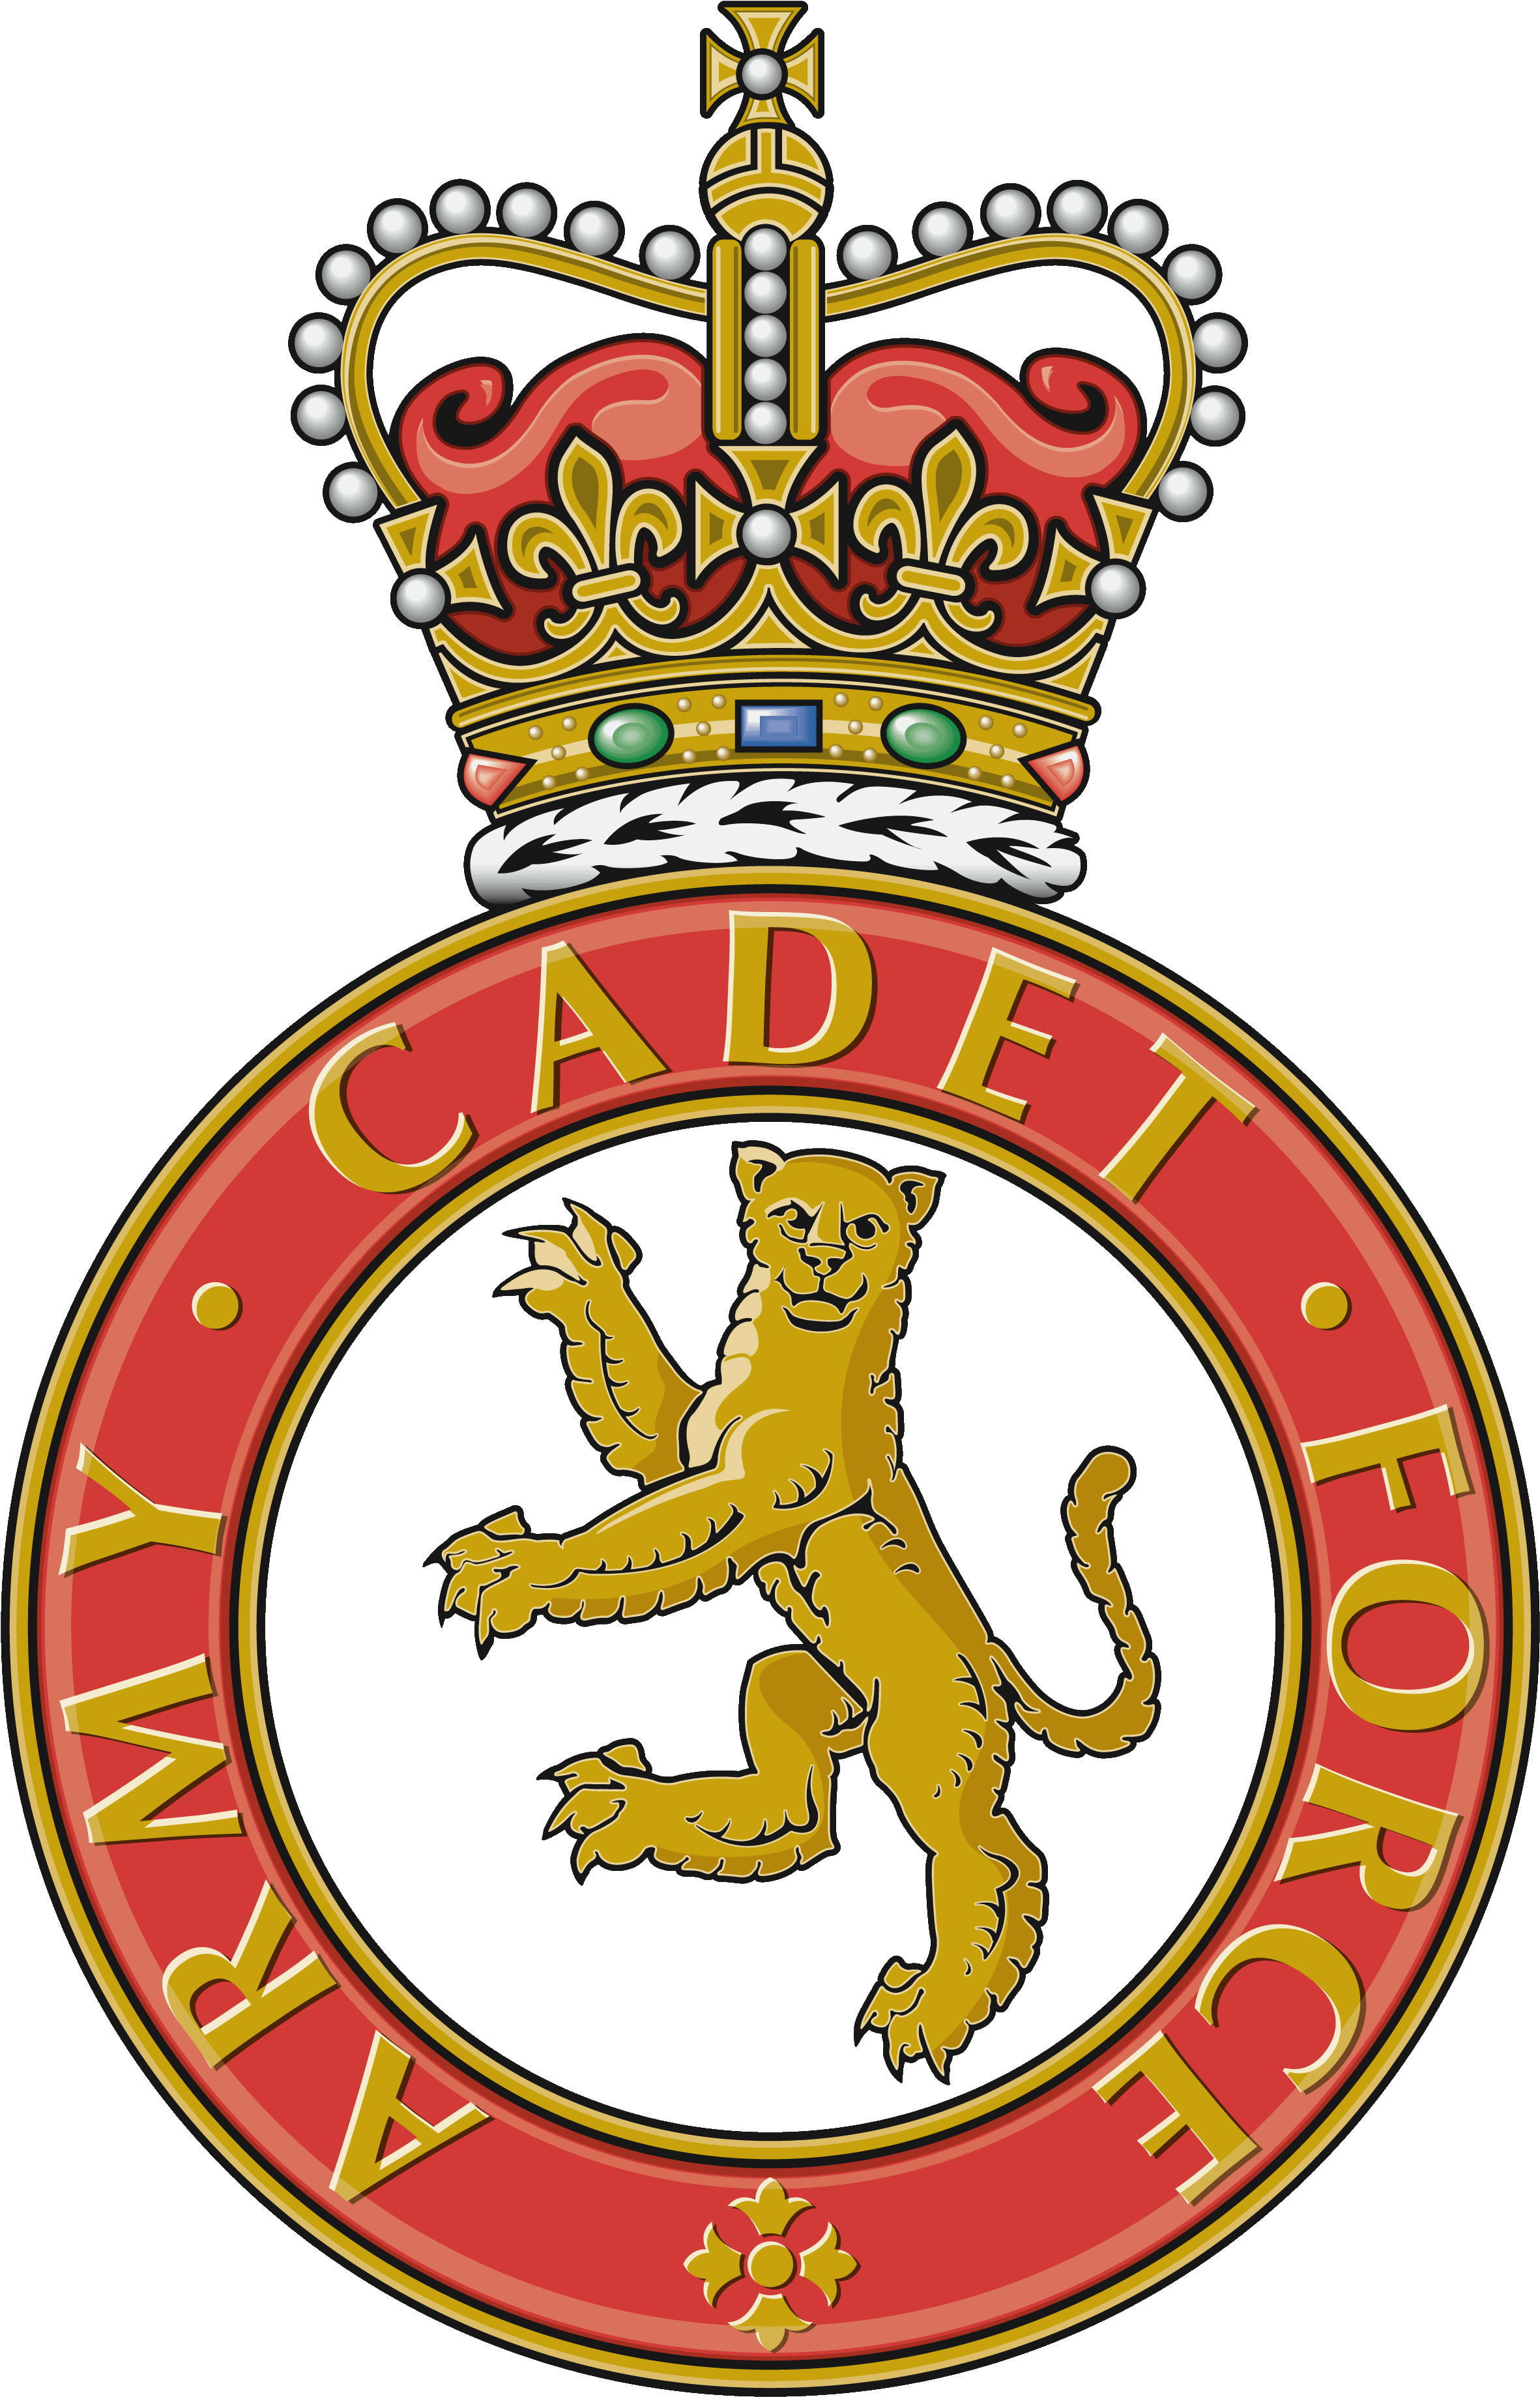 Northumbria Army Cadet Force (2480x3794)